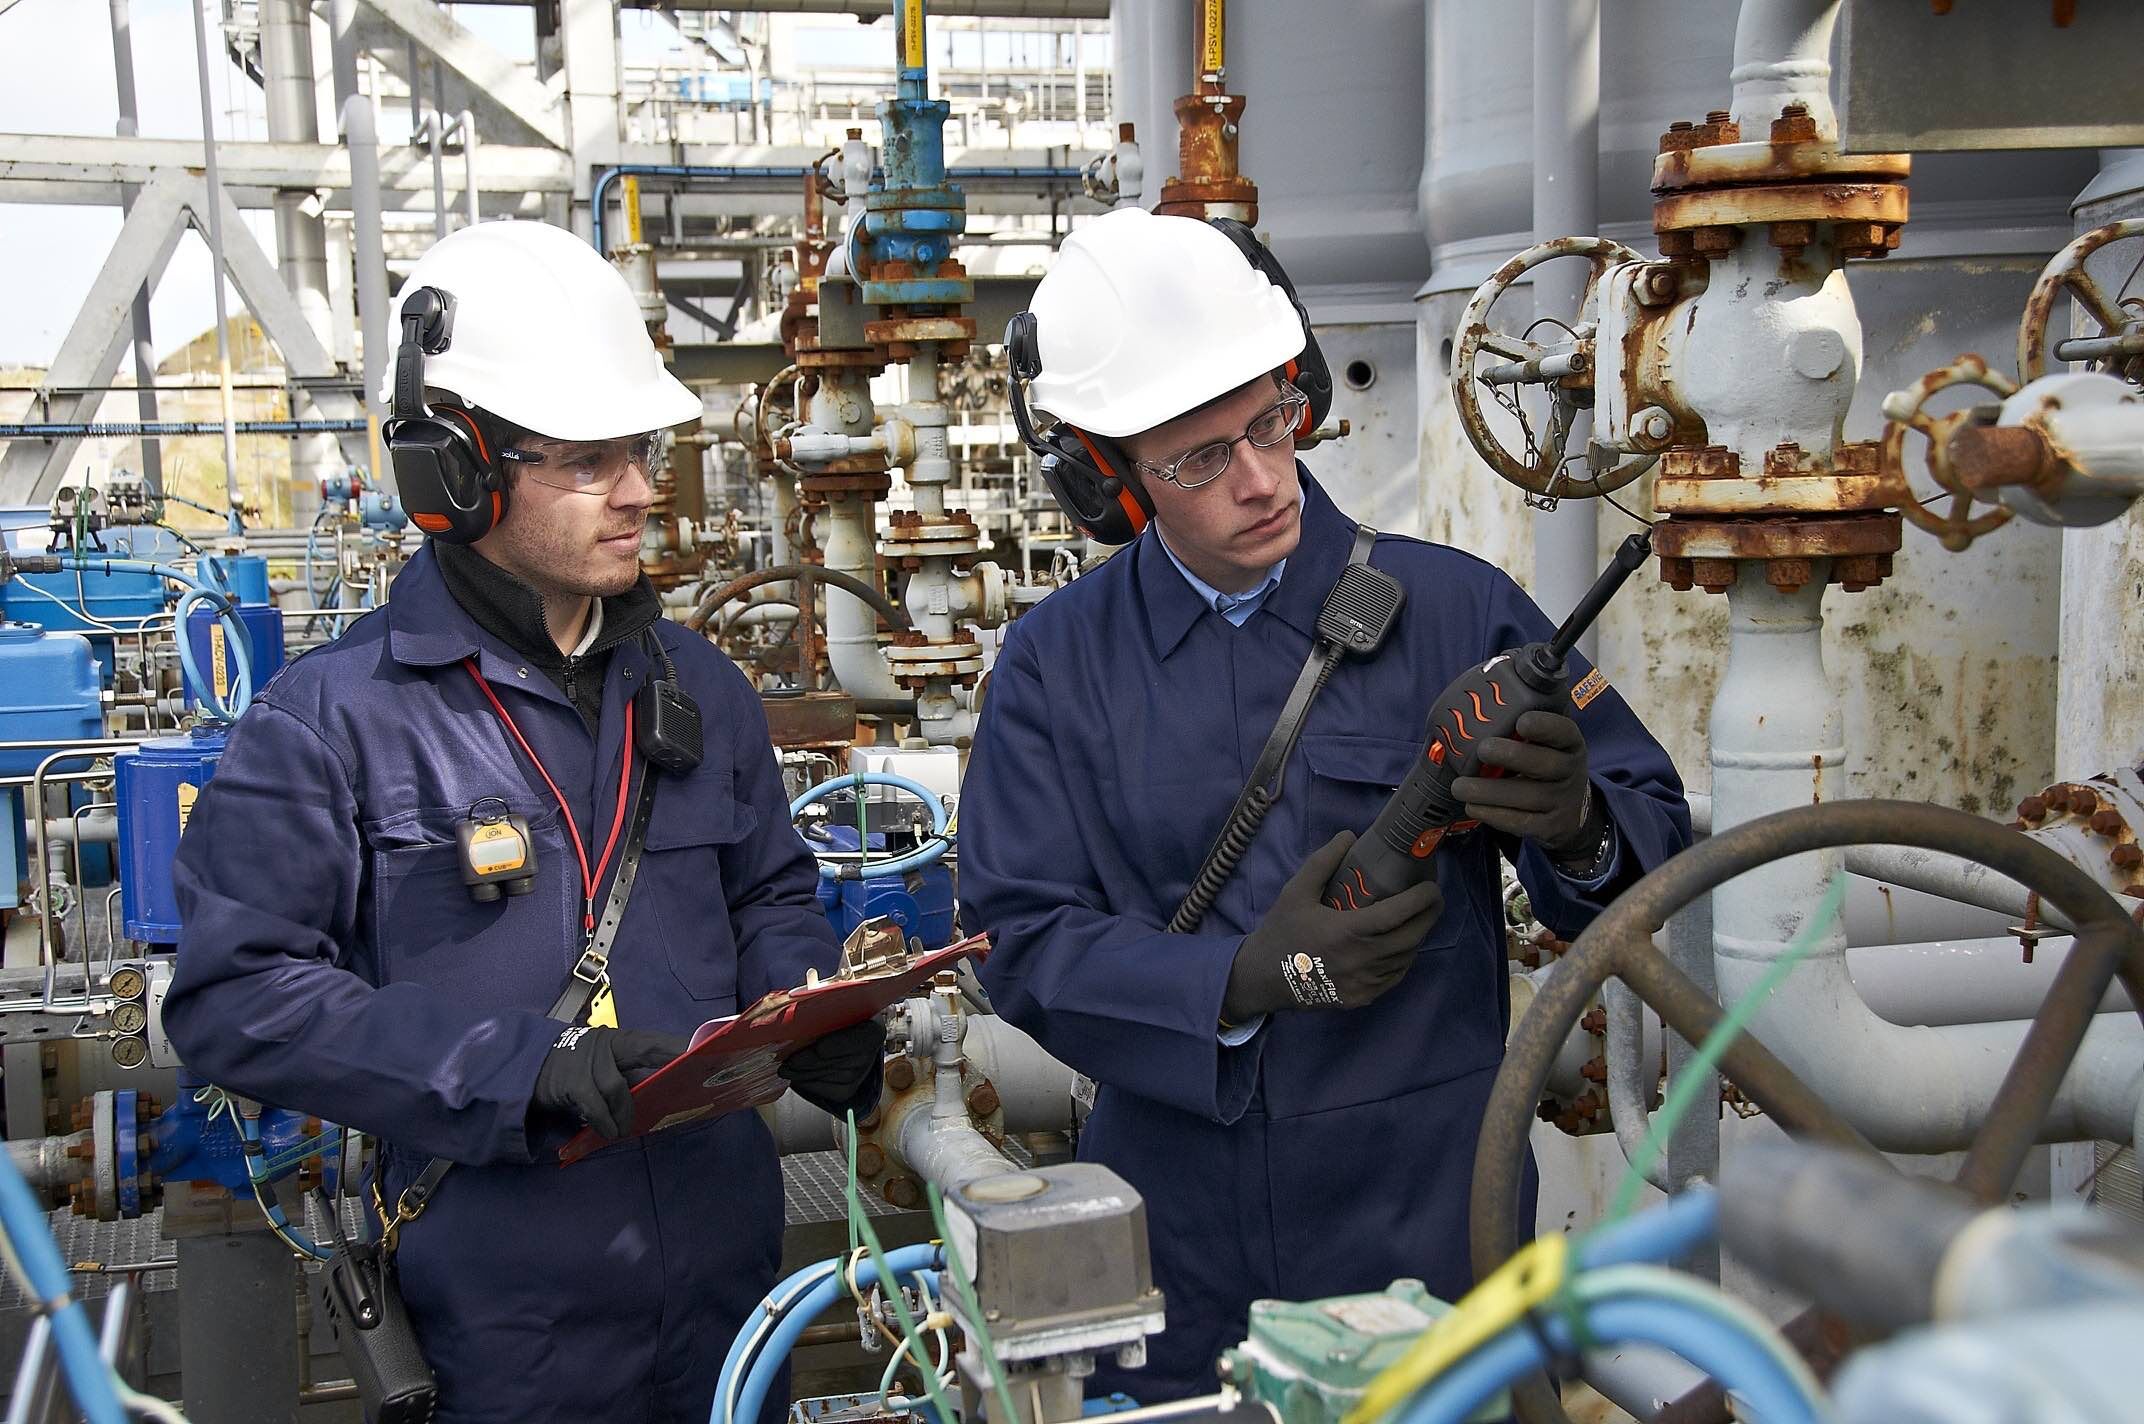 Delivering excellence in benzene monitoring instrumentation for the chemical, pharmaceutical and petrochemical industries